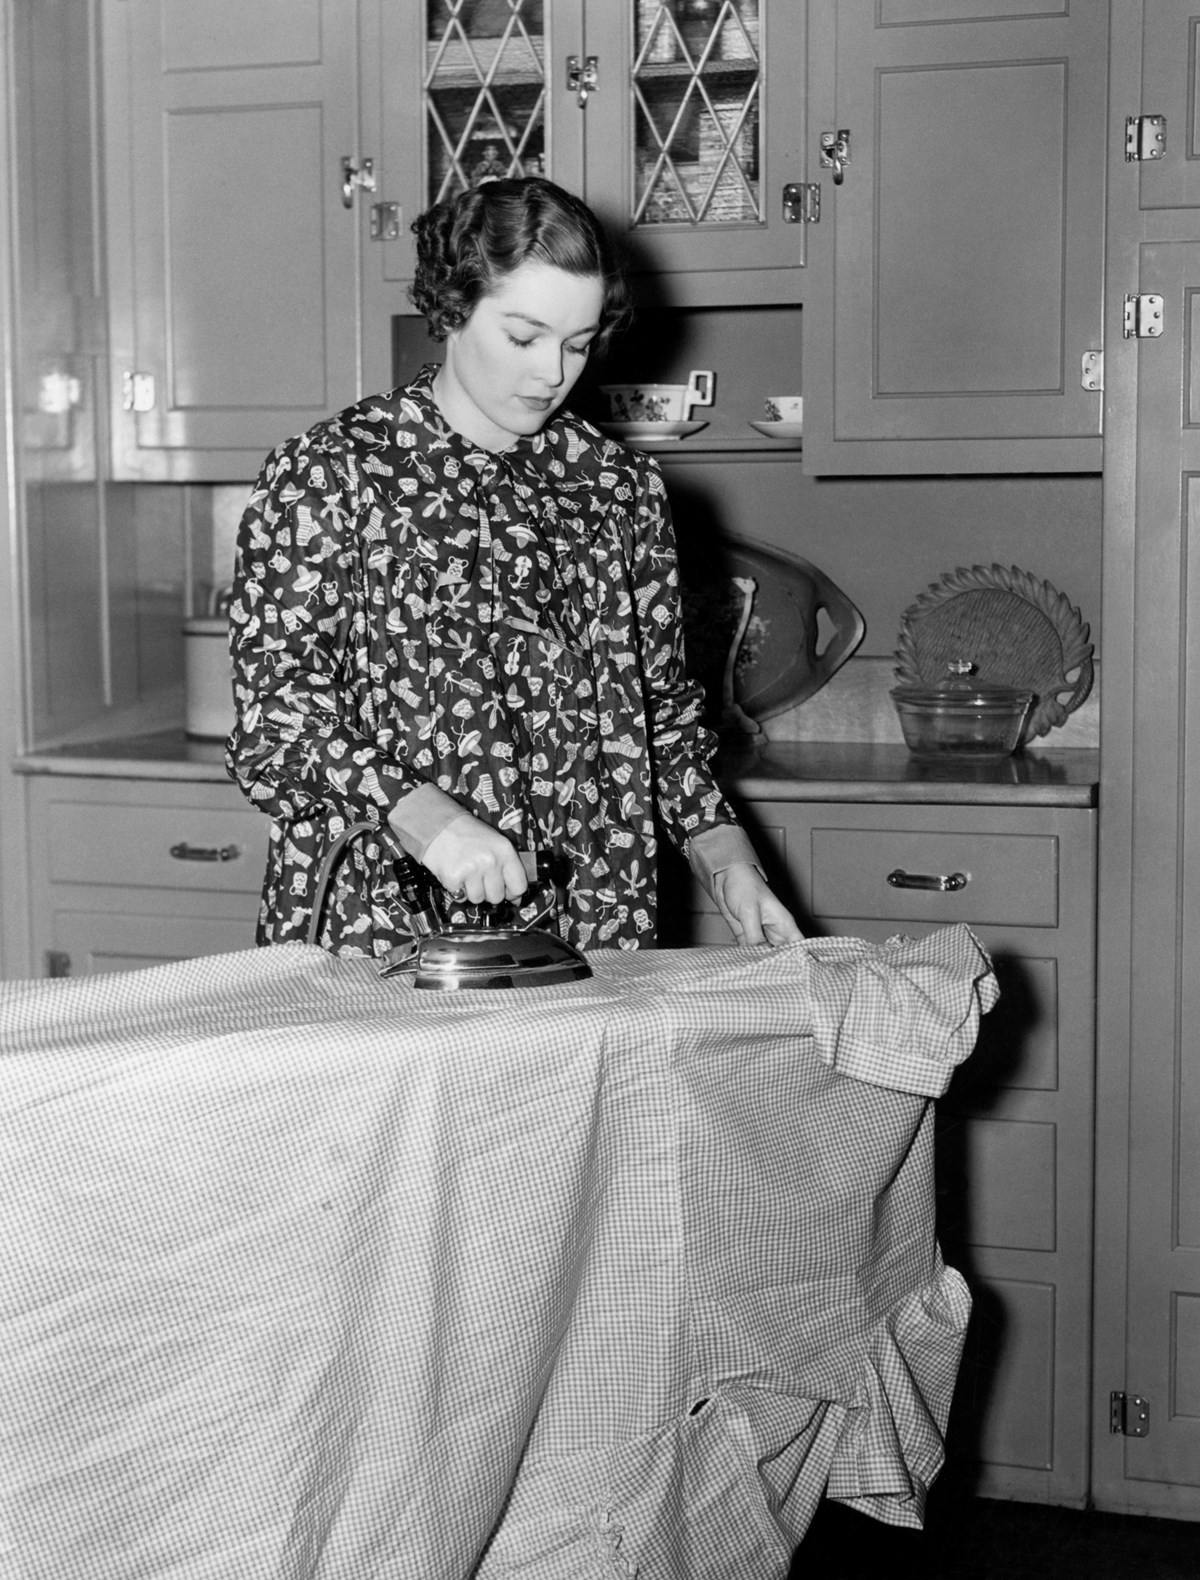 Black and white photo of a housewife using an electric iron on a checkered dress or apron. The woman is standing in front of cupboards of kitchenware. She is wearing a printed smock apron with little sombreros, cacti, scarves and musical instruments.